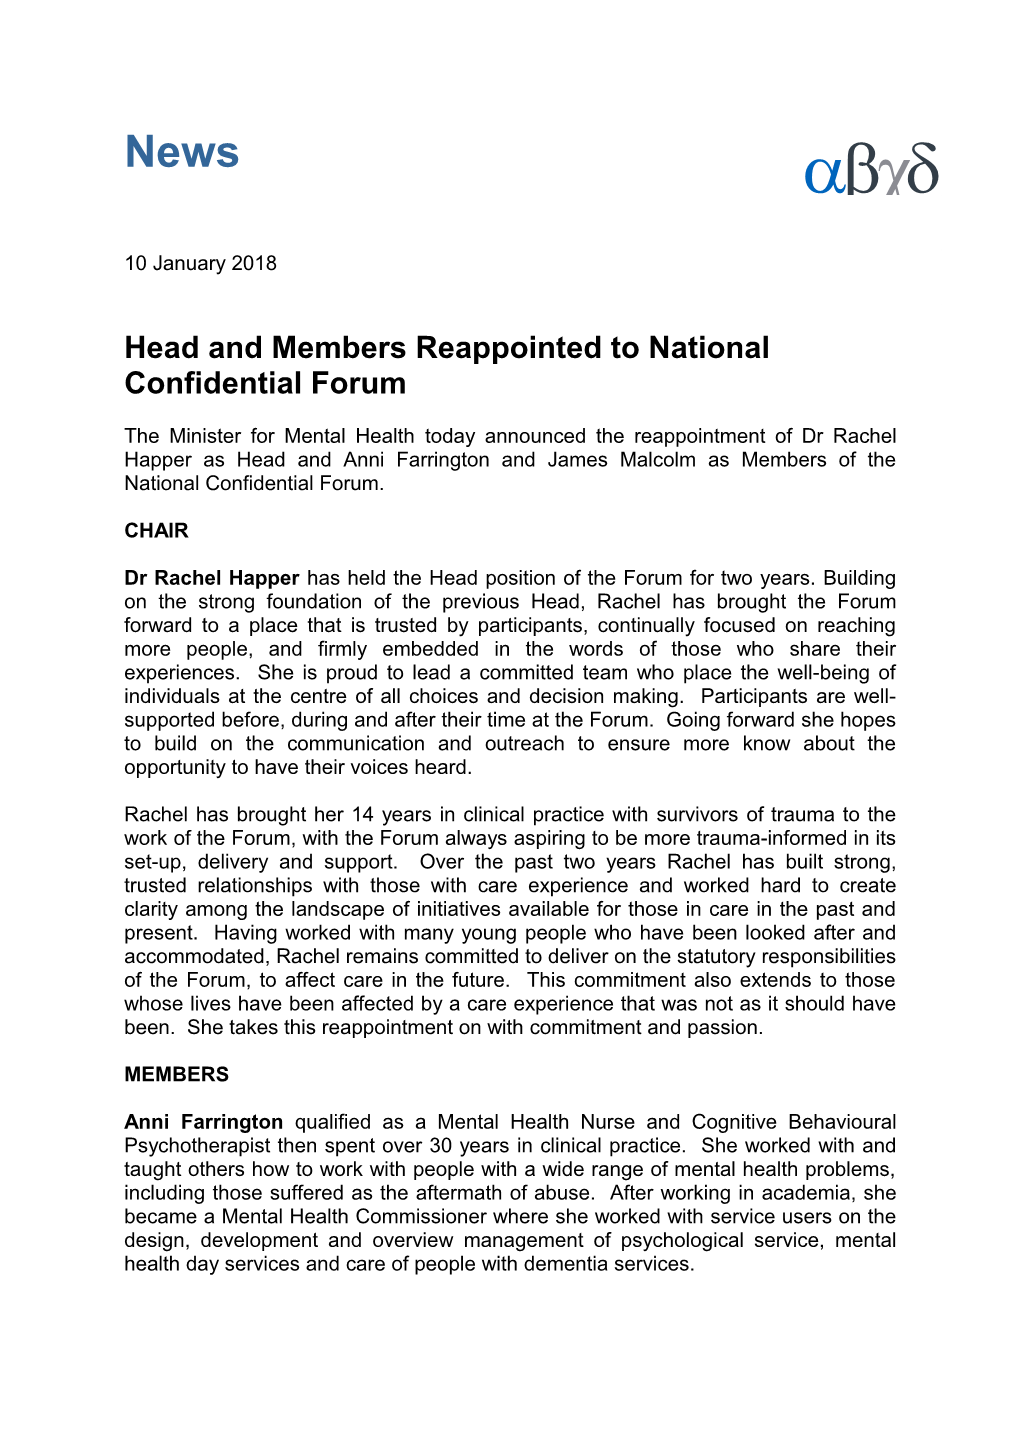 Head and Members Reappointed to National Confidential Forum